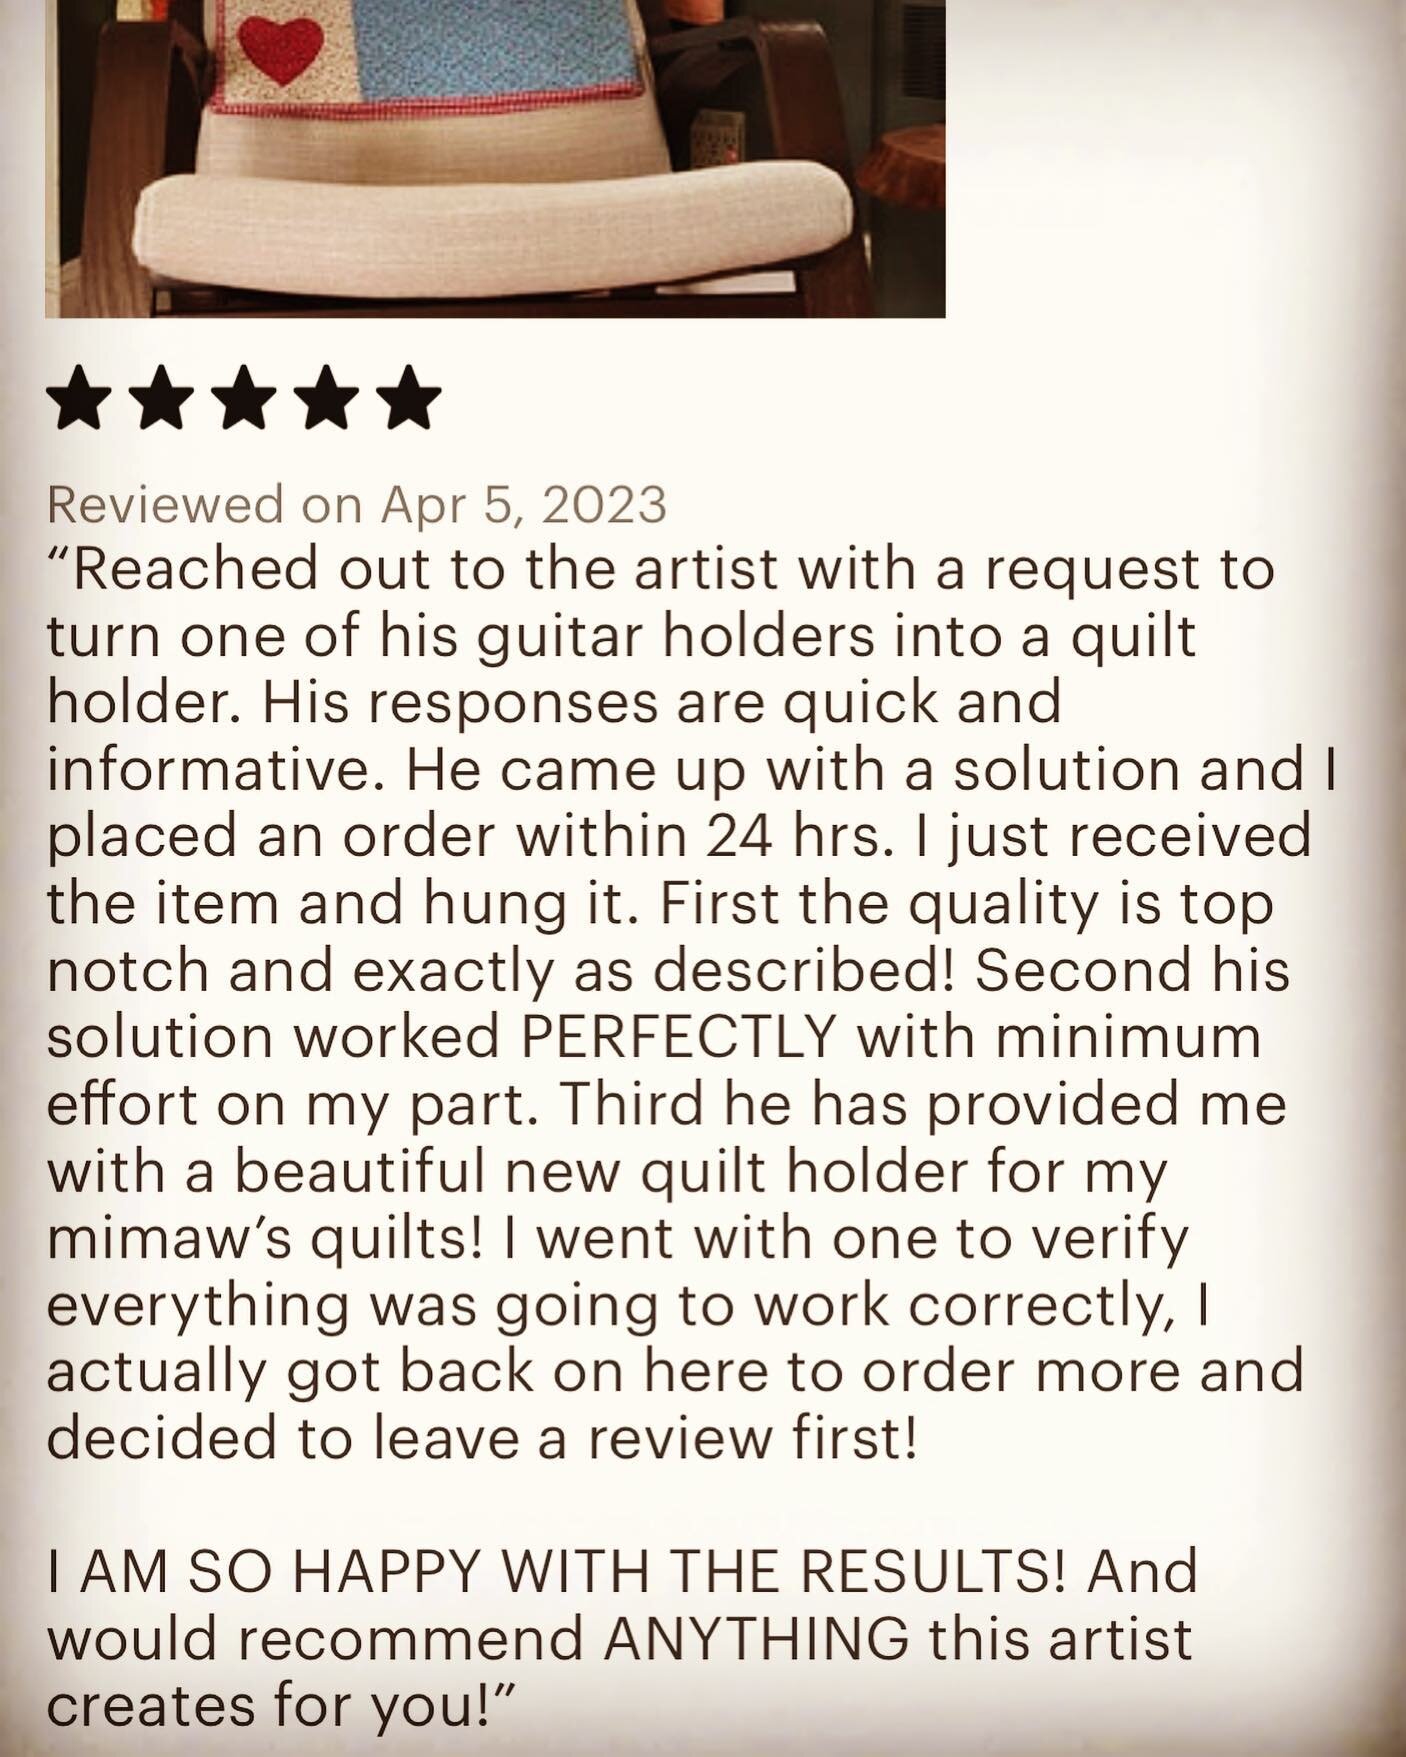 You got to love reviews that are so long you can&rsquo;t even fit the photo on the screen. Happy Monday! www.stonewallsstudio.com

#woodwork #woodworking #wood #handmade #woodworker #quilthanger #design #carpentry #etsy #interiordesign #carpenter #et